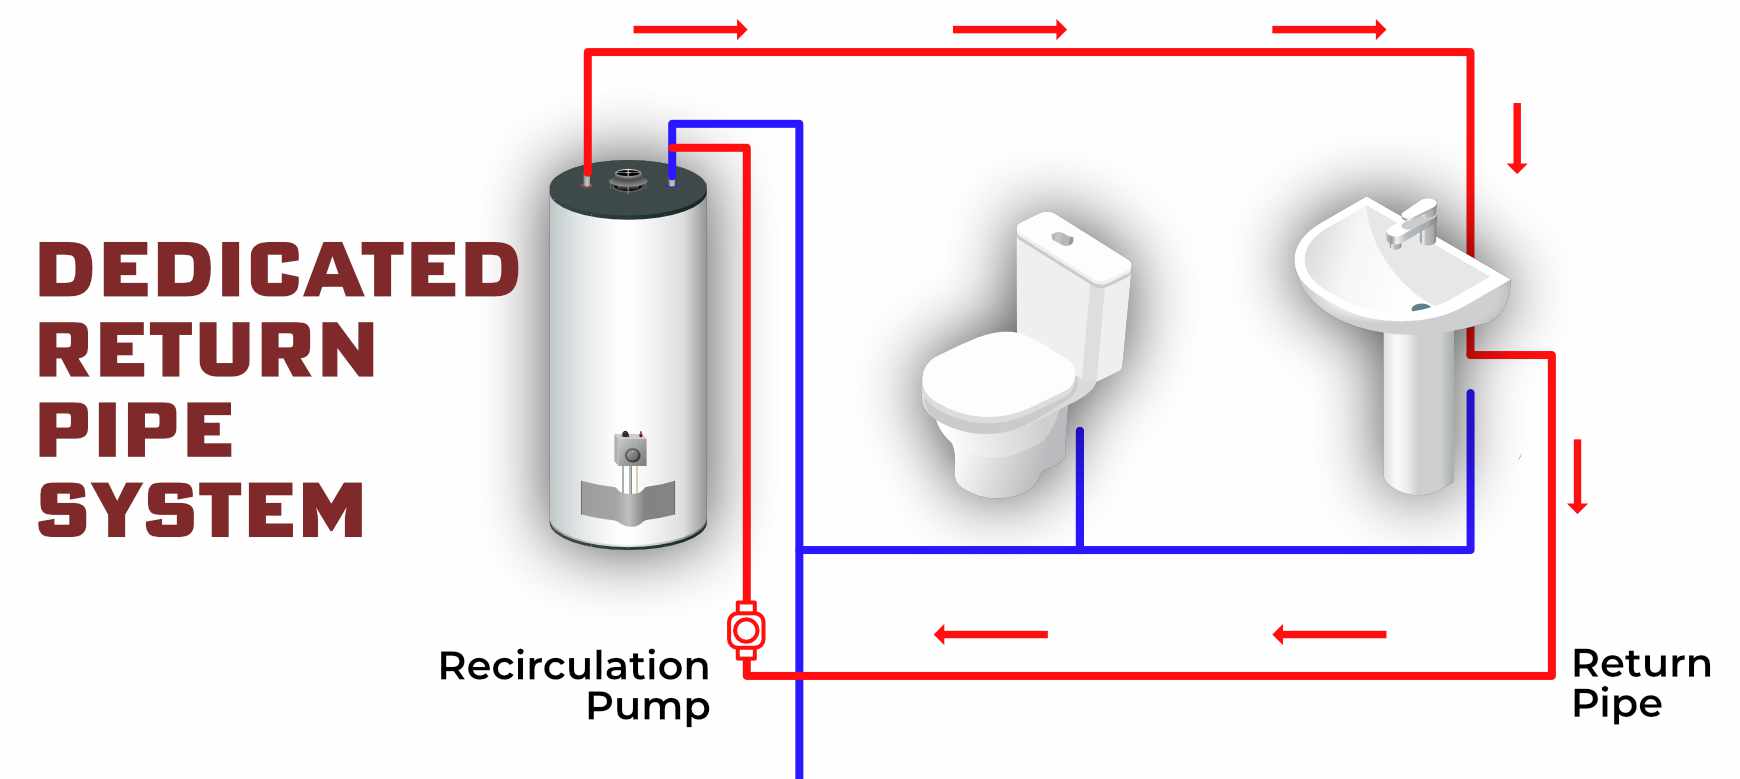 A simplified illustration of how a hot water recirculation system is plumbed with a dedicated return line